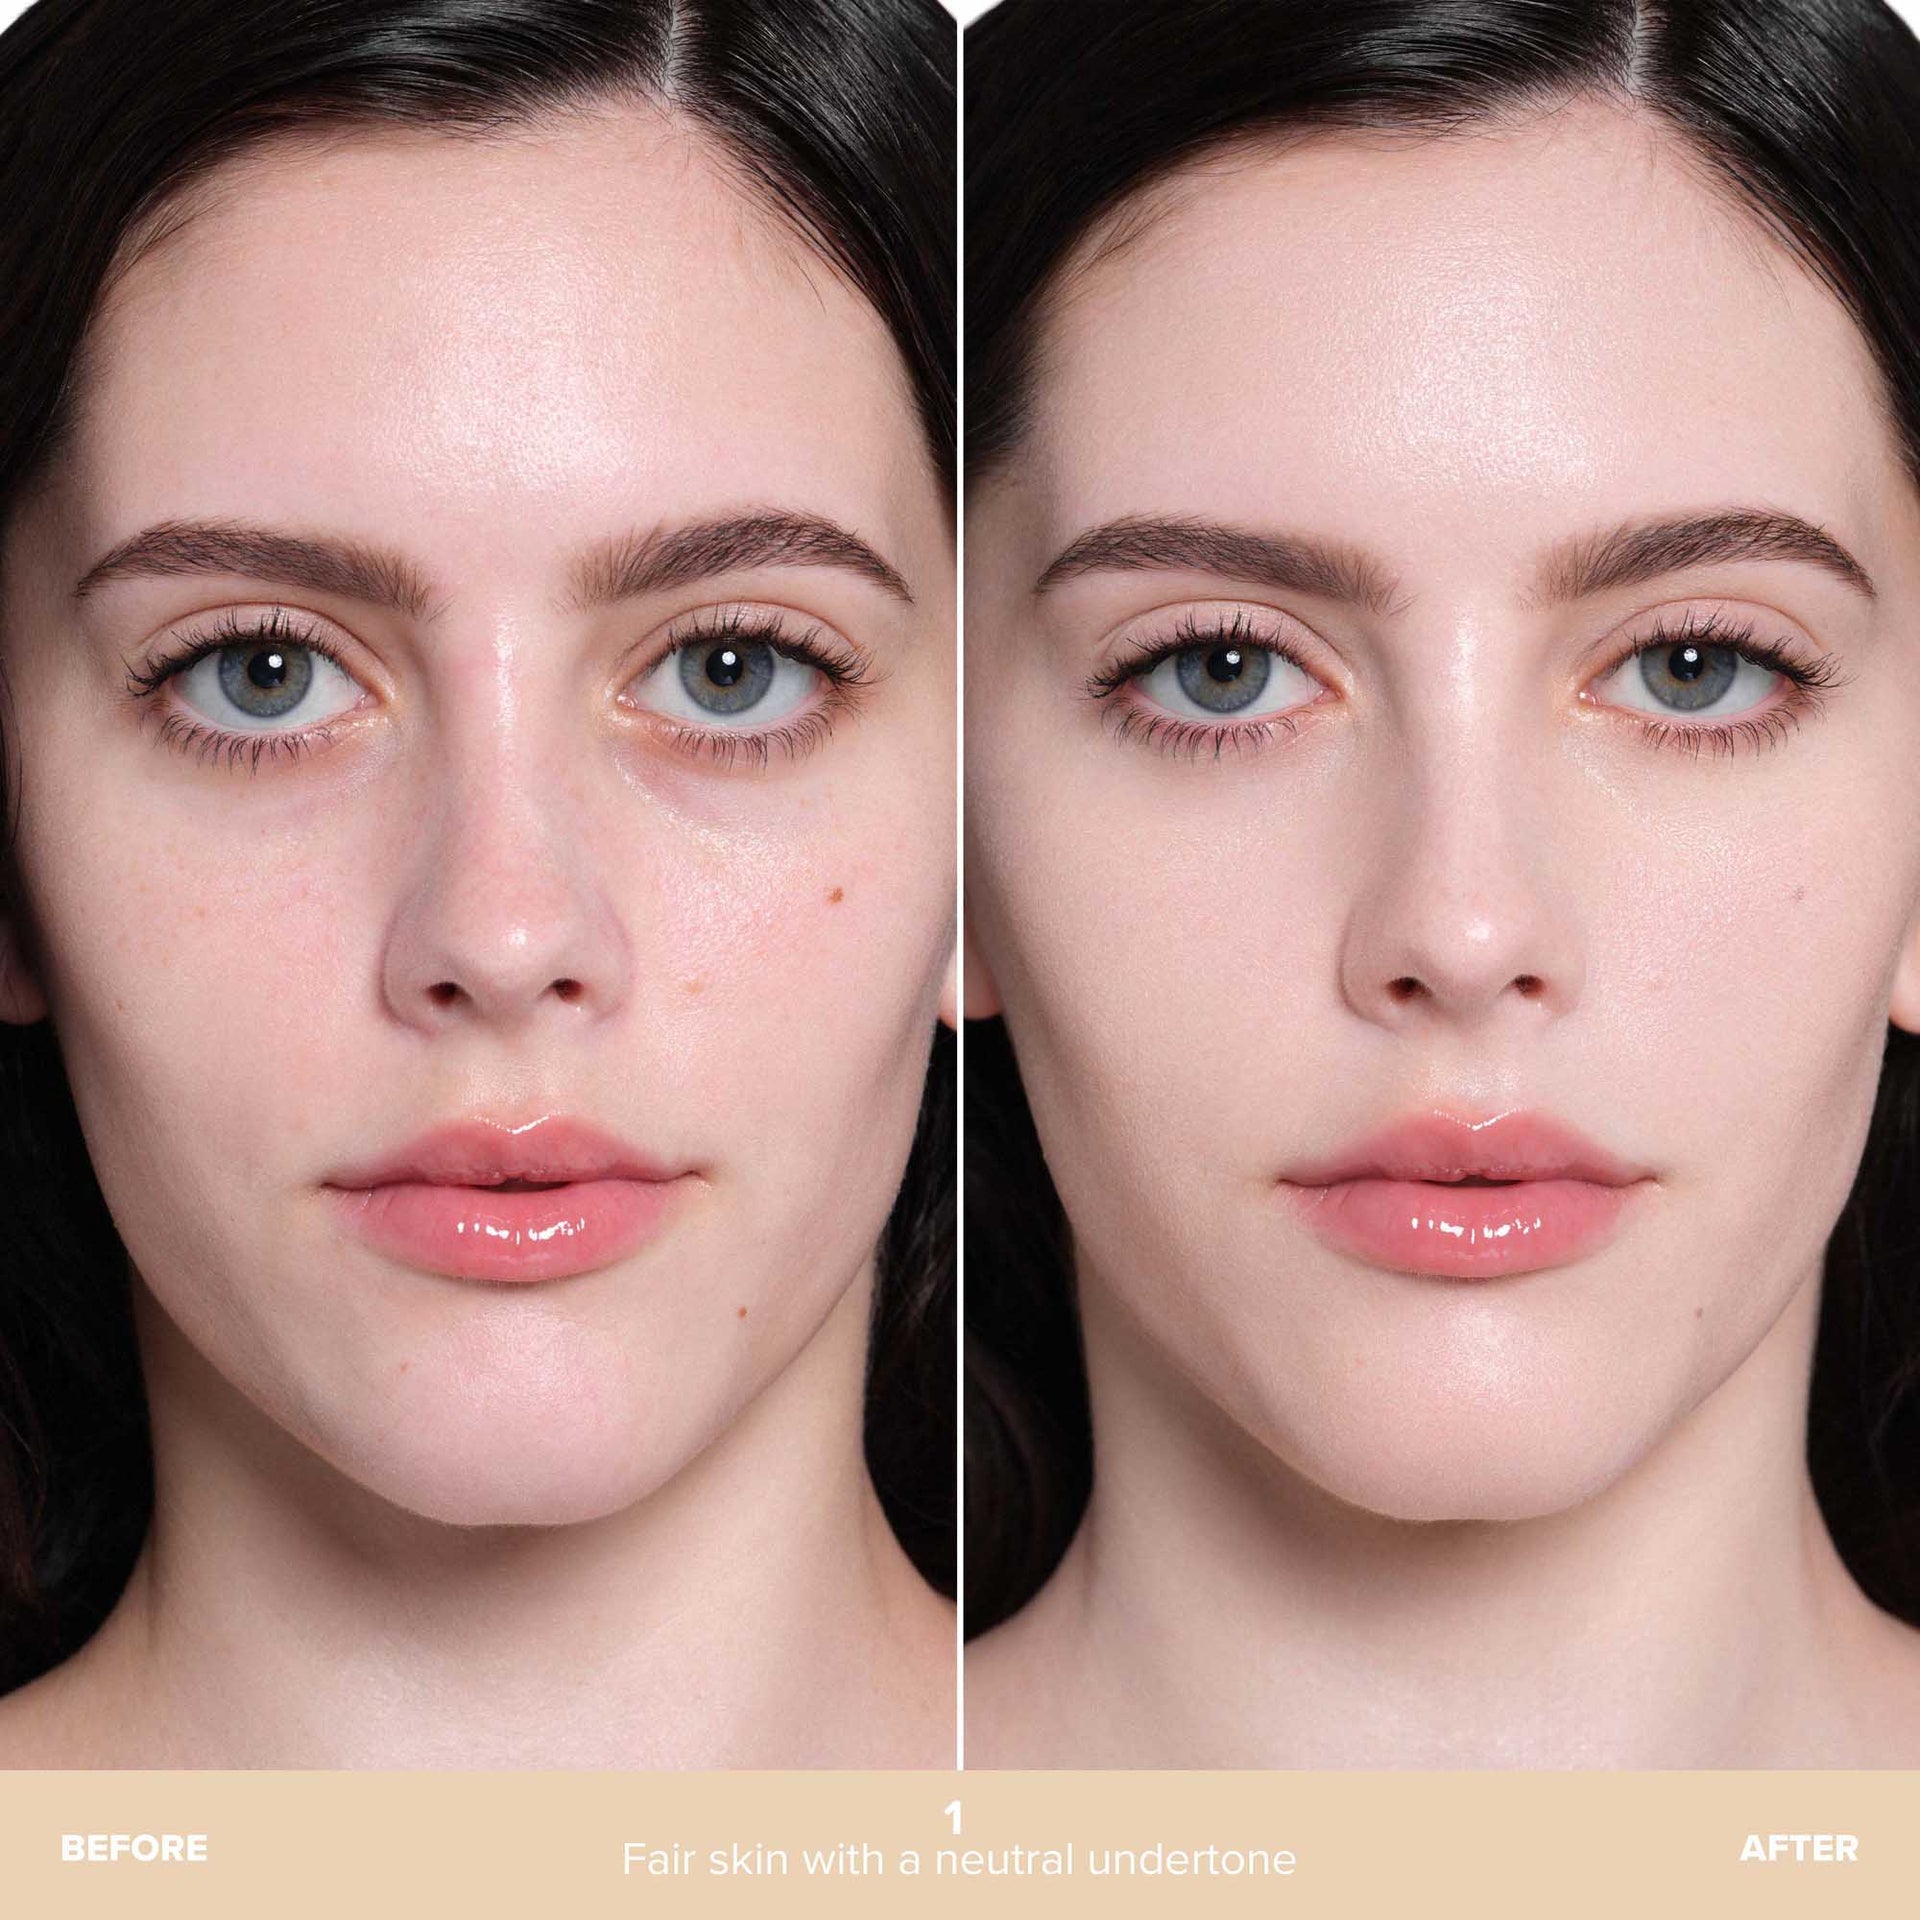 Shade 1 | Beauty Balm Serum Boosted Skin Tint Before & After - Shade 1